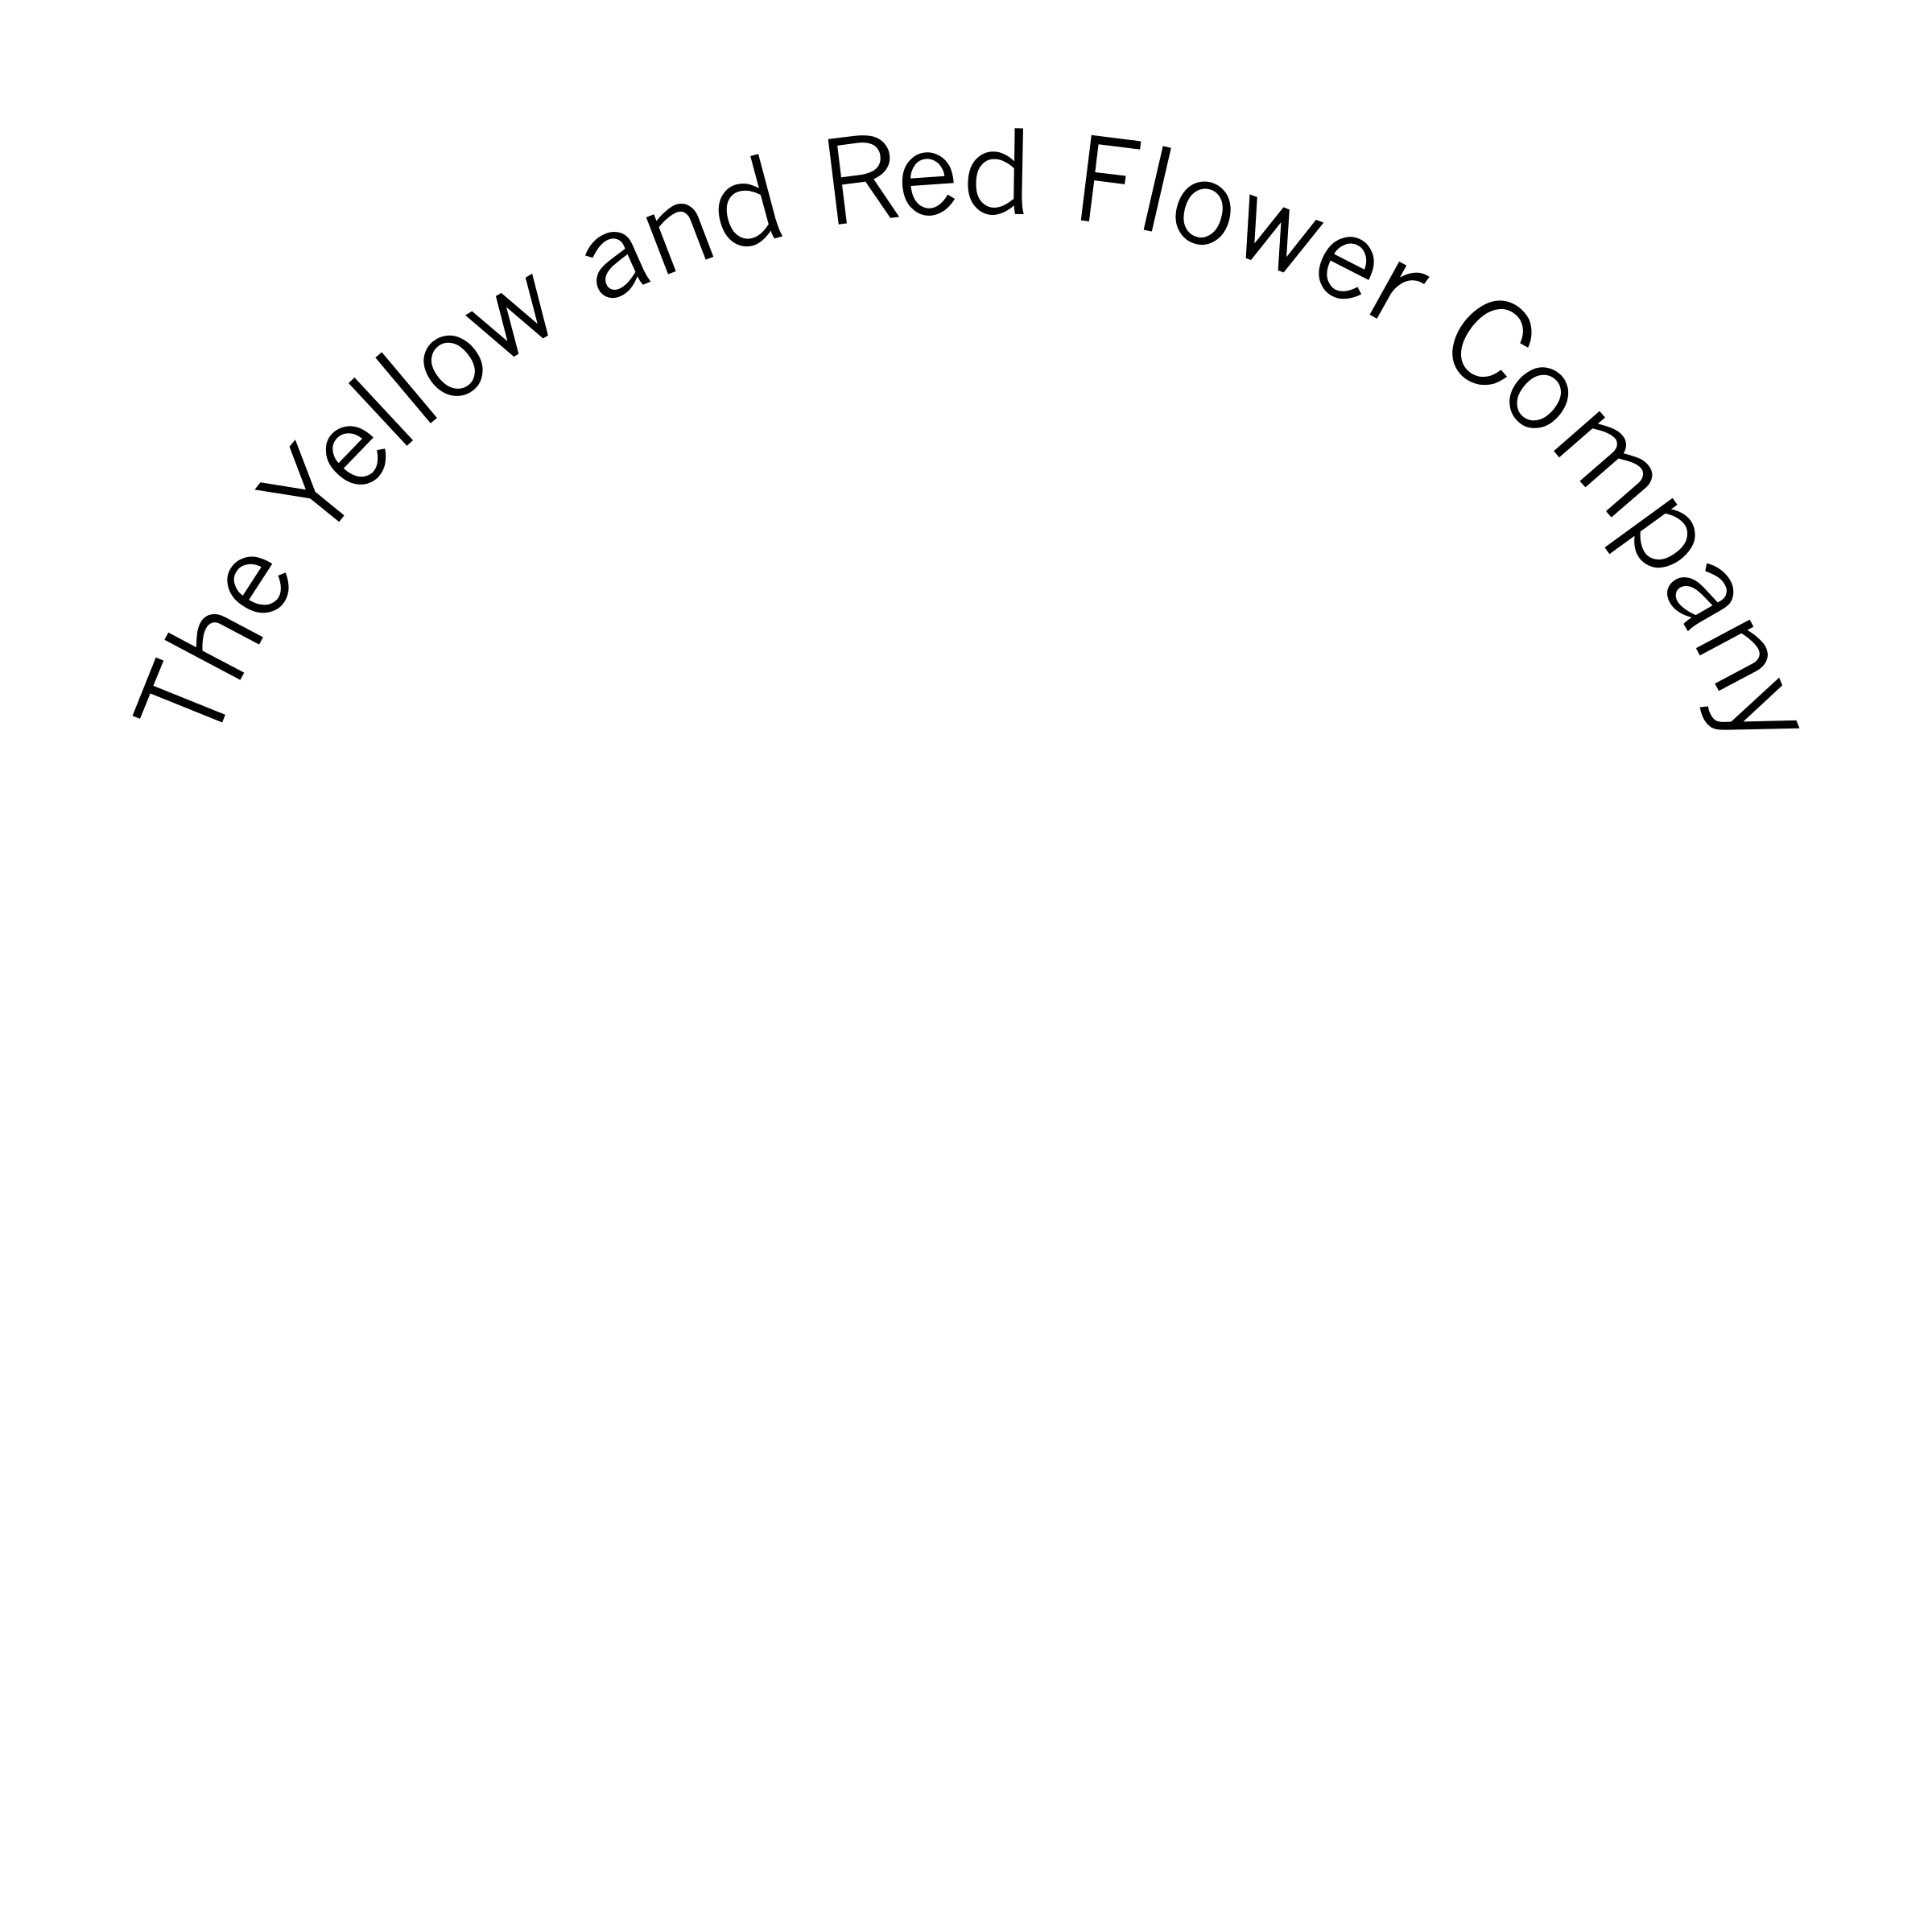 Black White and Red Company Logo - The Yellow and Red Flower Company Logo PNG Transparent & SVG Vector